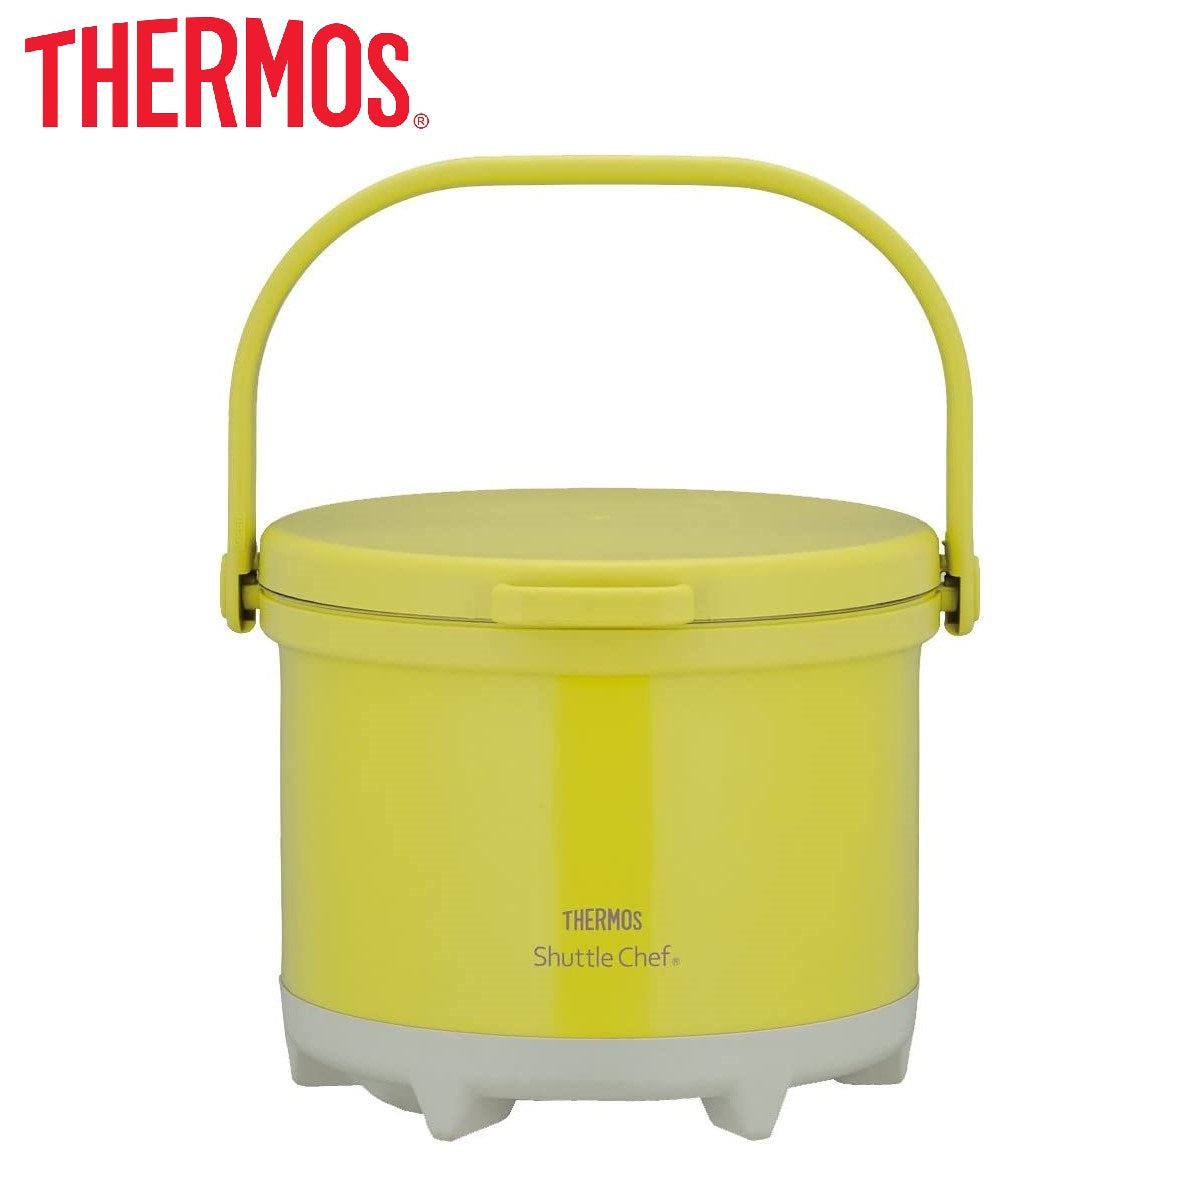 Buy Thermos cooker Shuttle Chef 0.8 gallons 3.0L RPE-3000